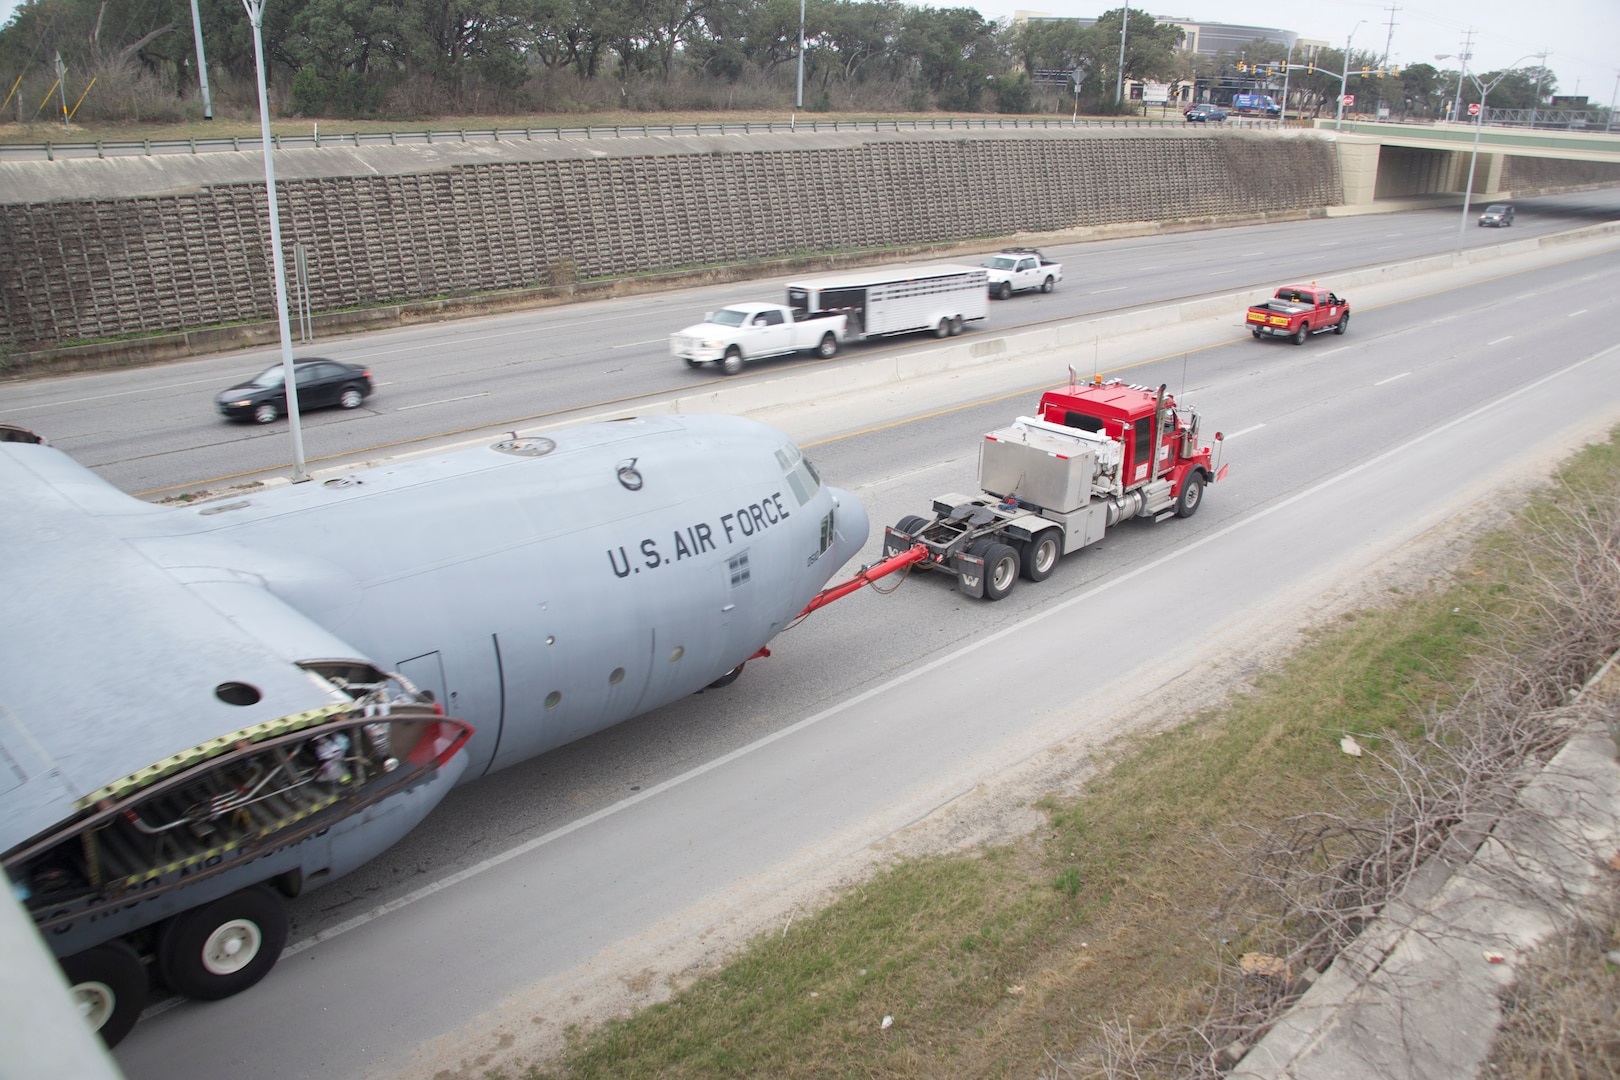 An Air Force C-130 Hercules cargo aircraft makes its way up Texas State Highway Loop 1604 to its final destination at Joint Base San Antonio-Camp Bullis Sunday.  It took about four hours to transport the aircraft across San Antonio.  The C-130 was diverted from decommissioning by the Puerto Rico Air National Guard and is now set to be a simulator trainer for about 1,300 students per year participating in the aeromedical evacuation and patient staging course at the Medical Readiness Training Center at JBSA-Camp Bullis. (U.S. Air Force photo by Dan Solis)